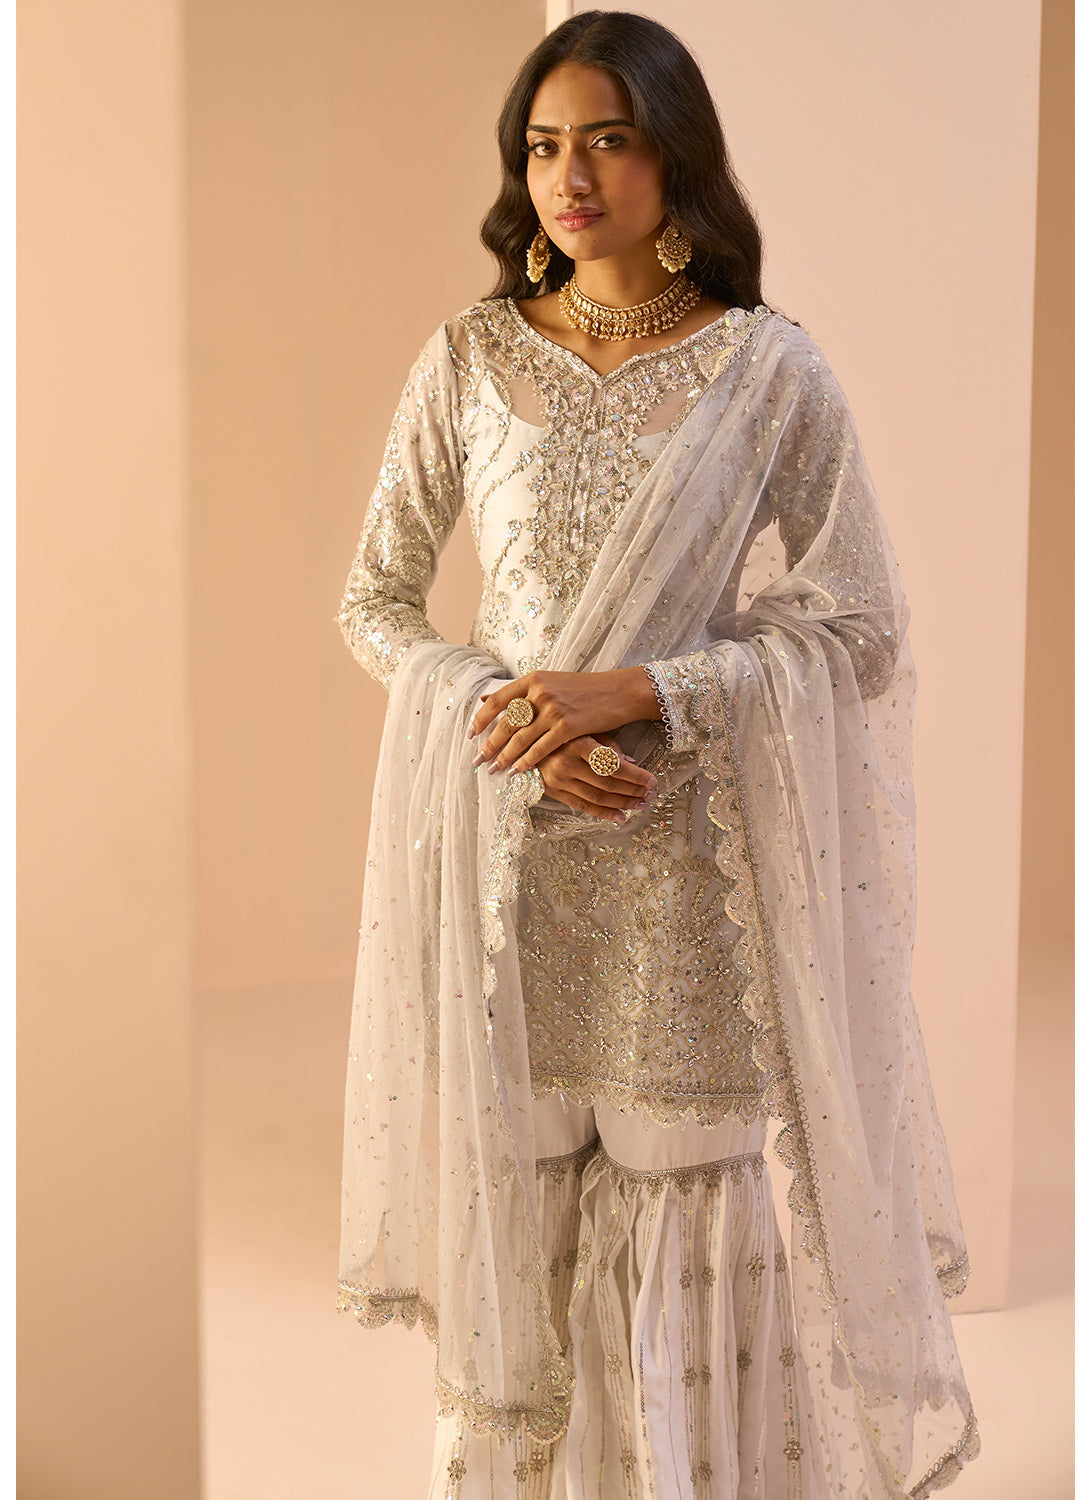 Dusty Blue and White Embroidered Gharara Suit